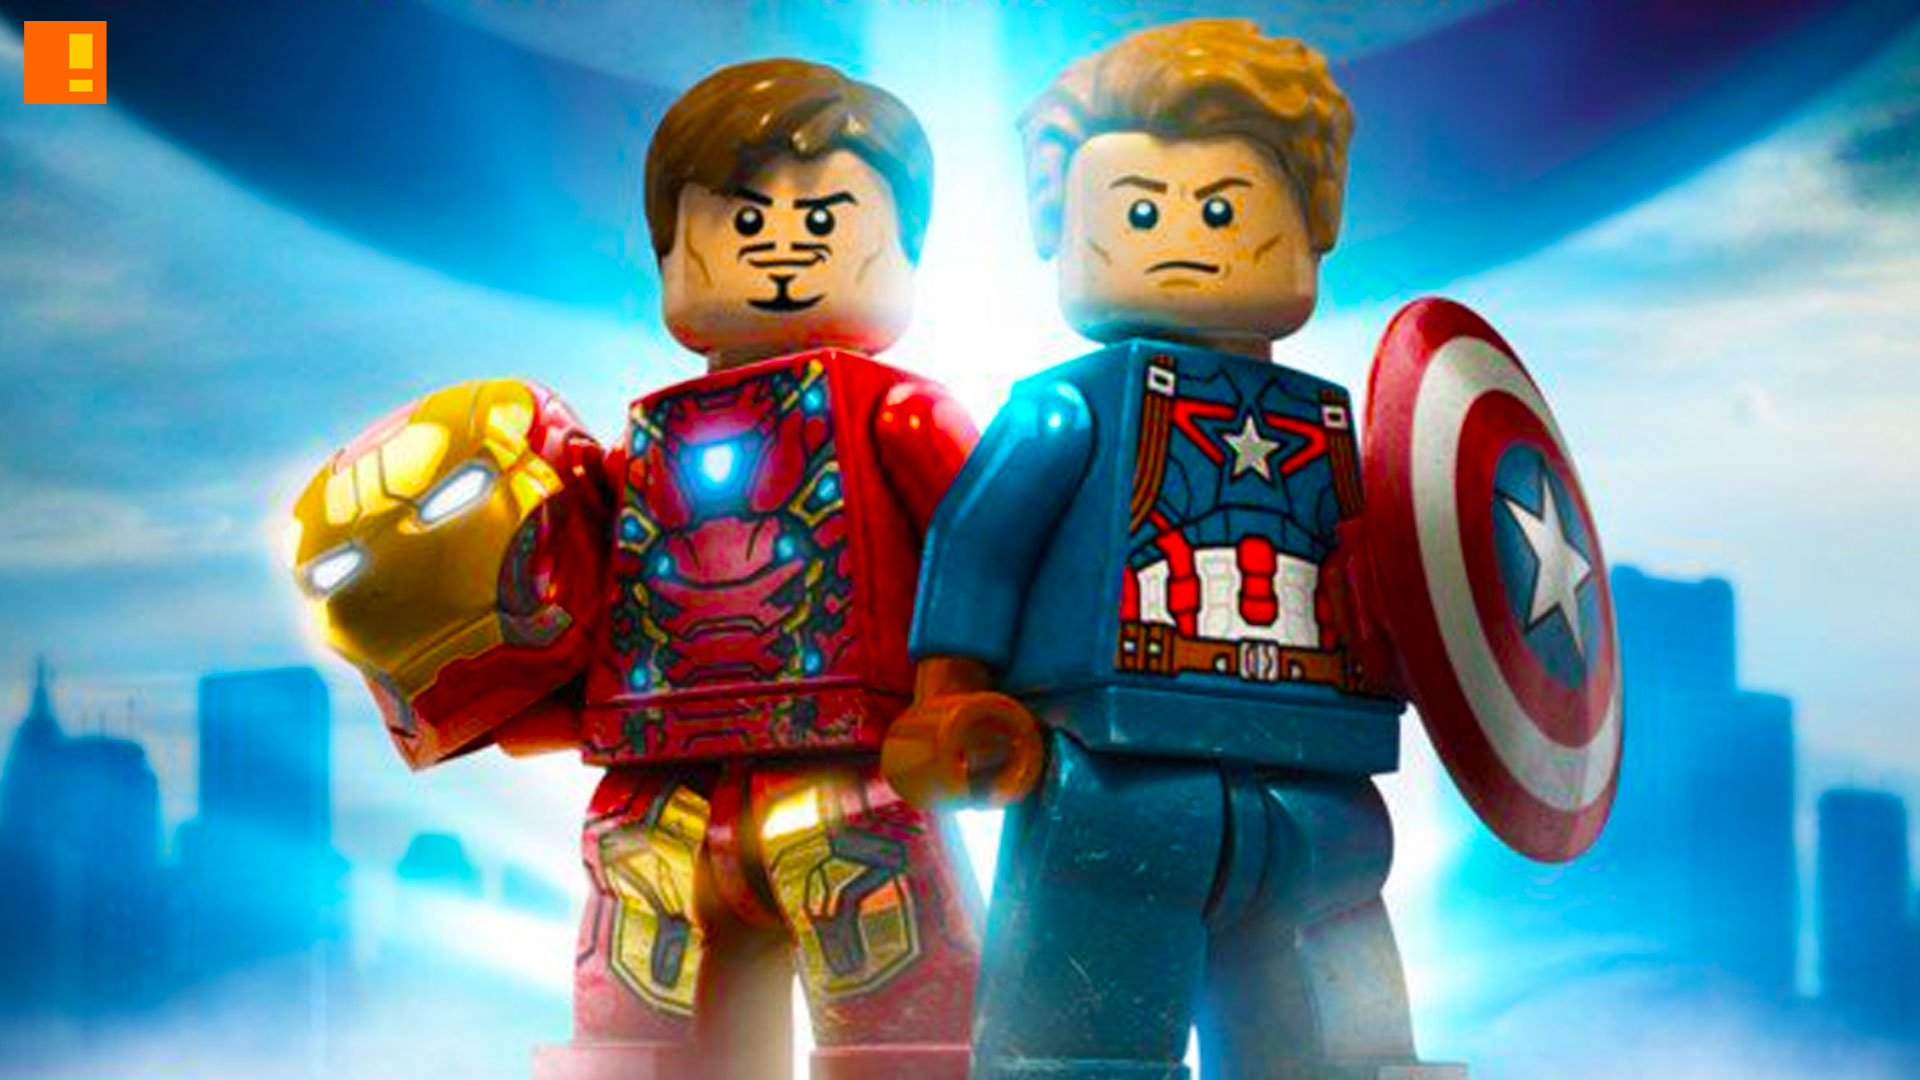 lego marvel avengers pc spider-man character pack free download